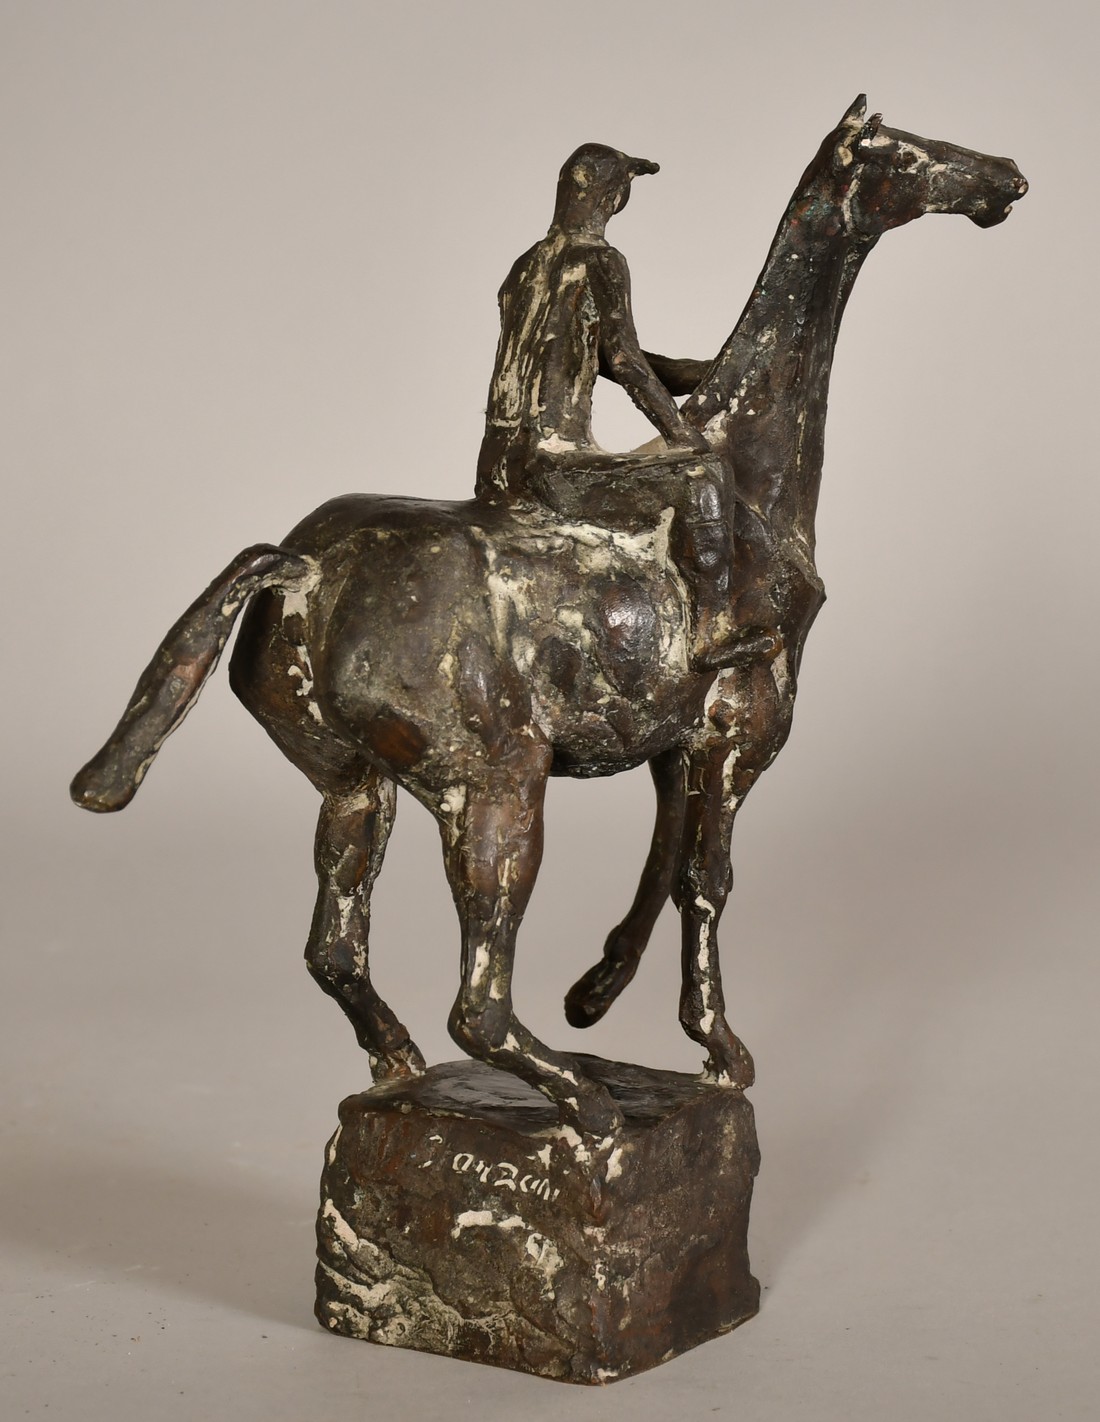 Emilio Stanzani (1906-1977) Swiss, a horse and jockey, bronze, signed, 9.25" (23cm) high overall. - Image 3 of 6